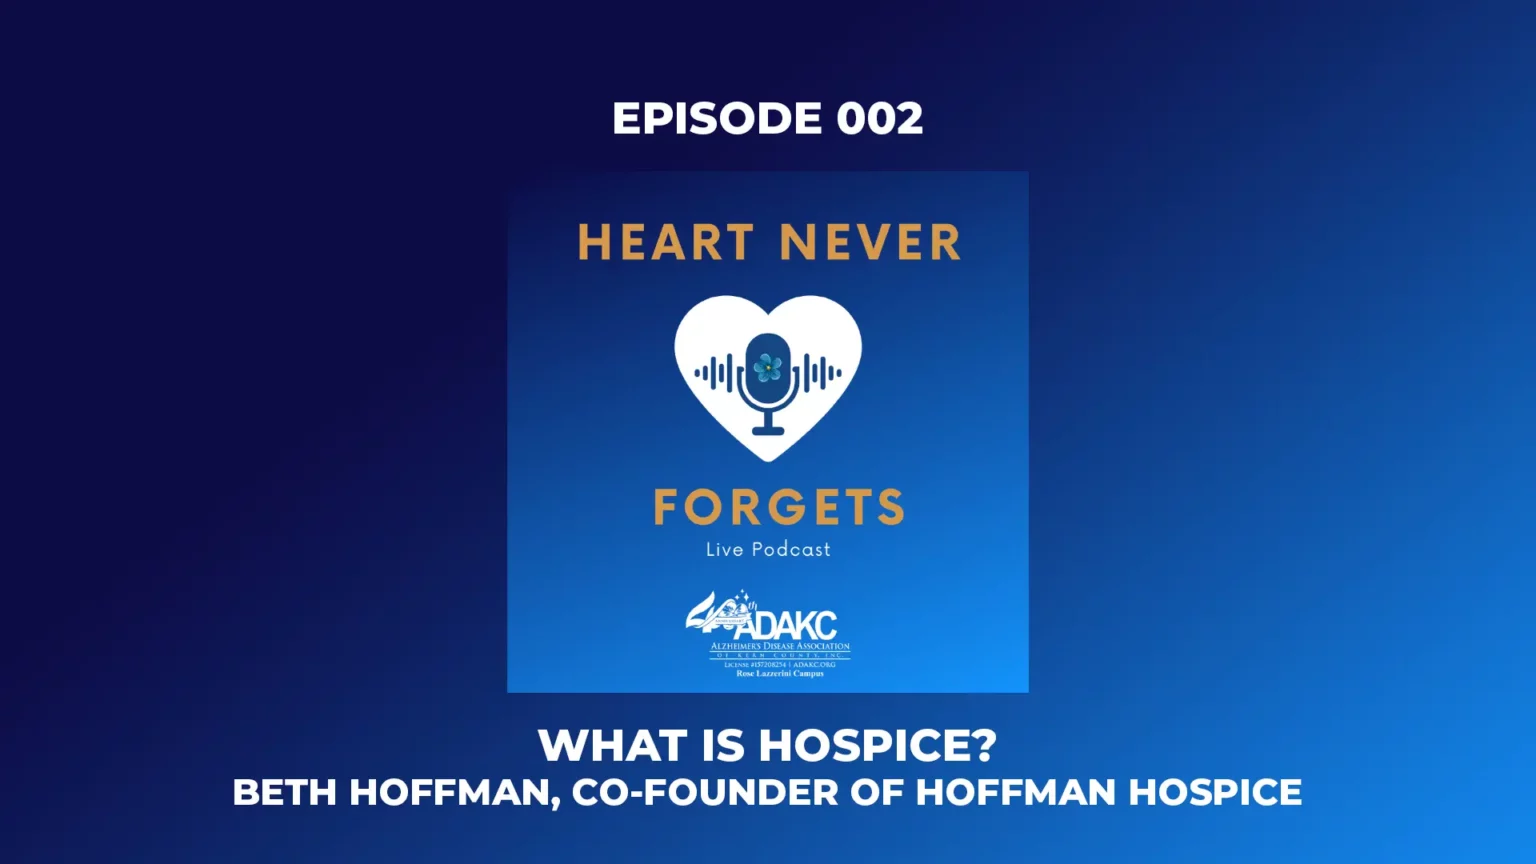 The Heart Never Forgets Podcast - Episode 002 - What is Hospice?